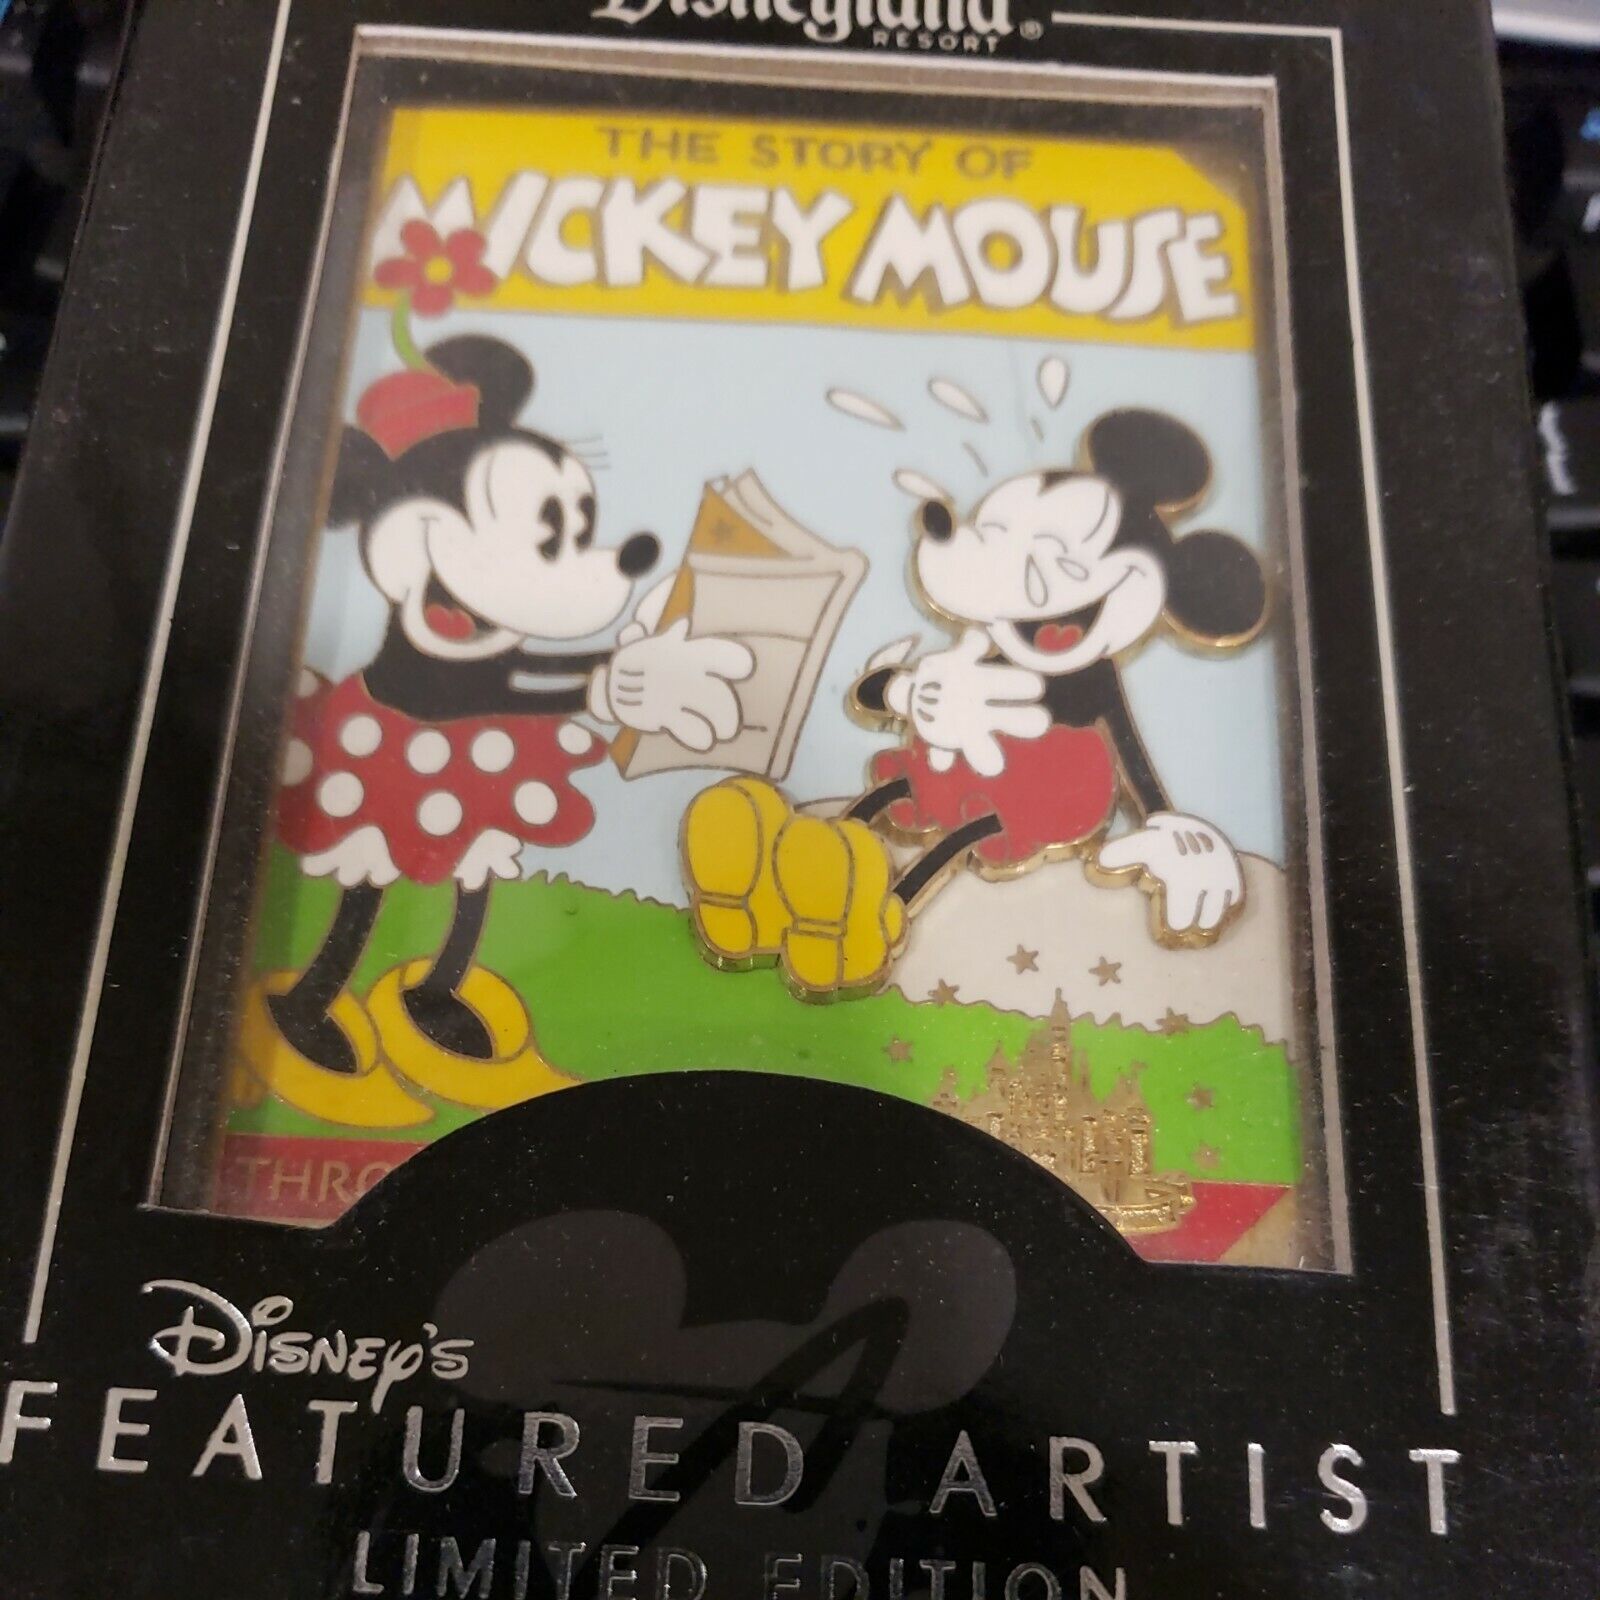 Disney Pin 47002 DLR Featured Artist 2006 The Story of Mickey Mouse LE 750